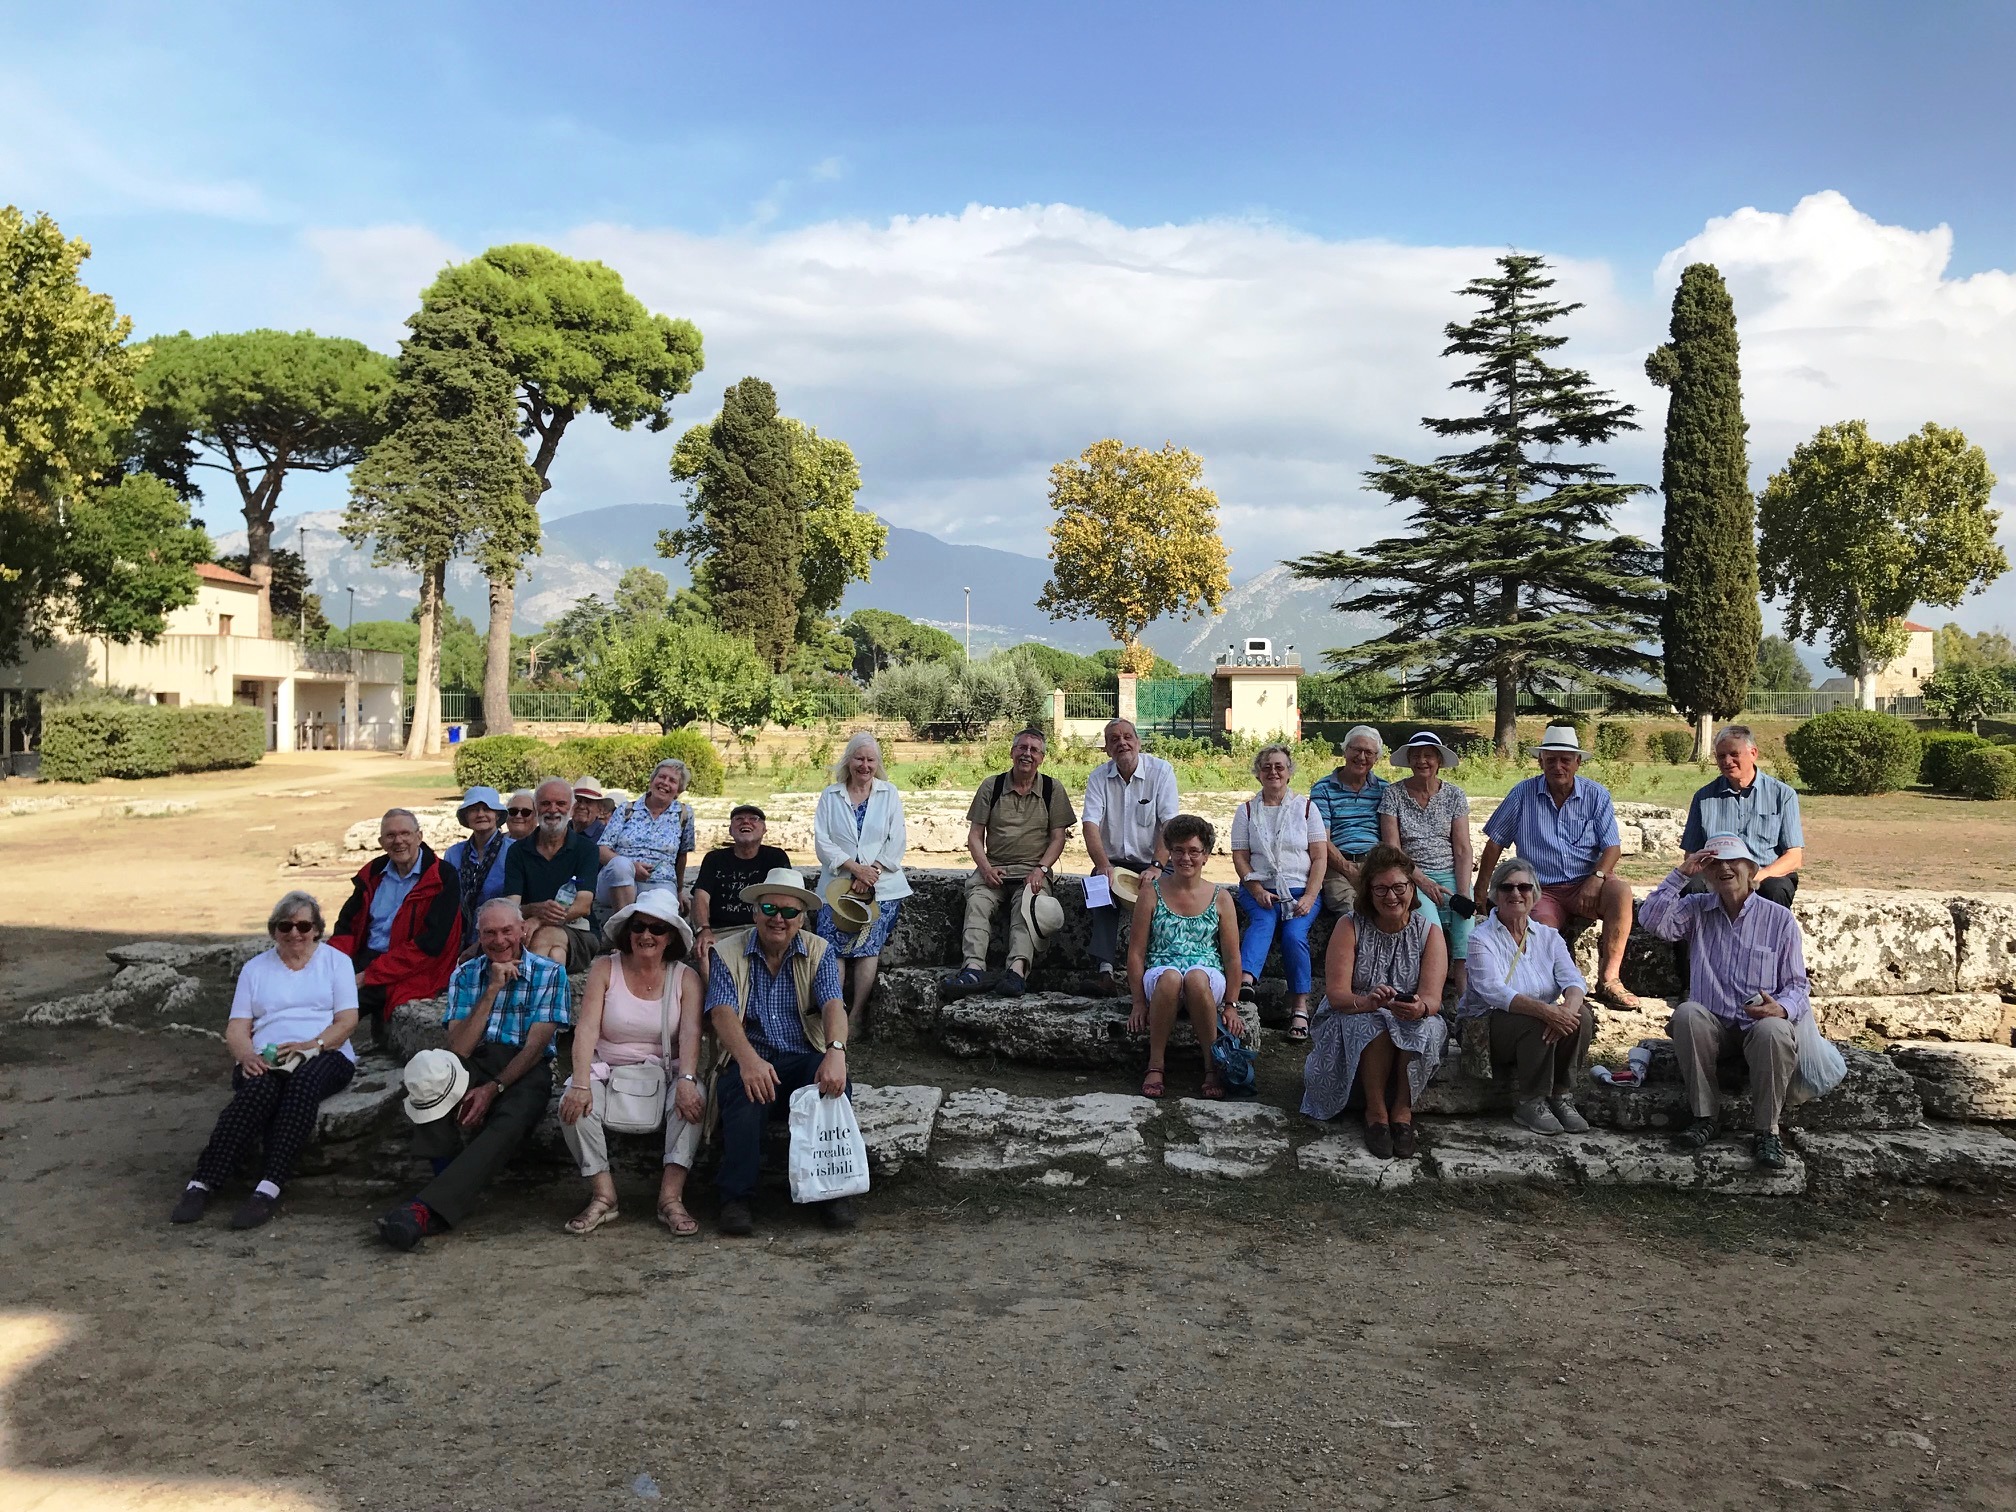 Happy faces on the Society visit to Paestum, Italy. September 2019